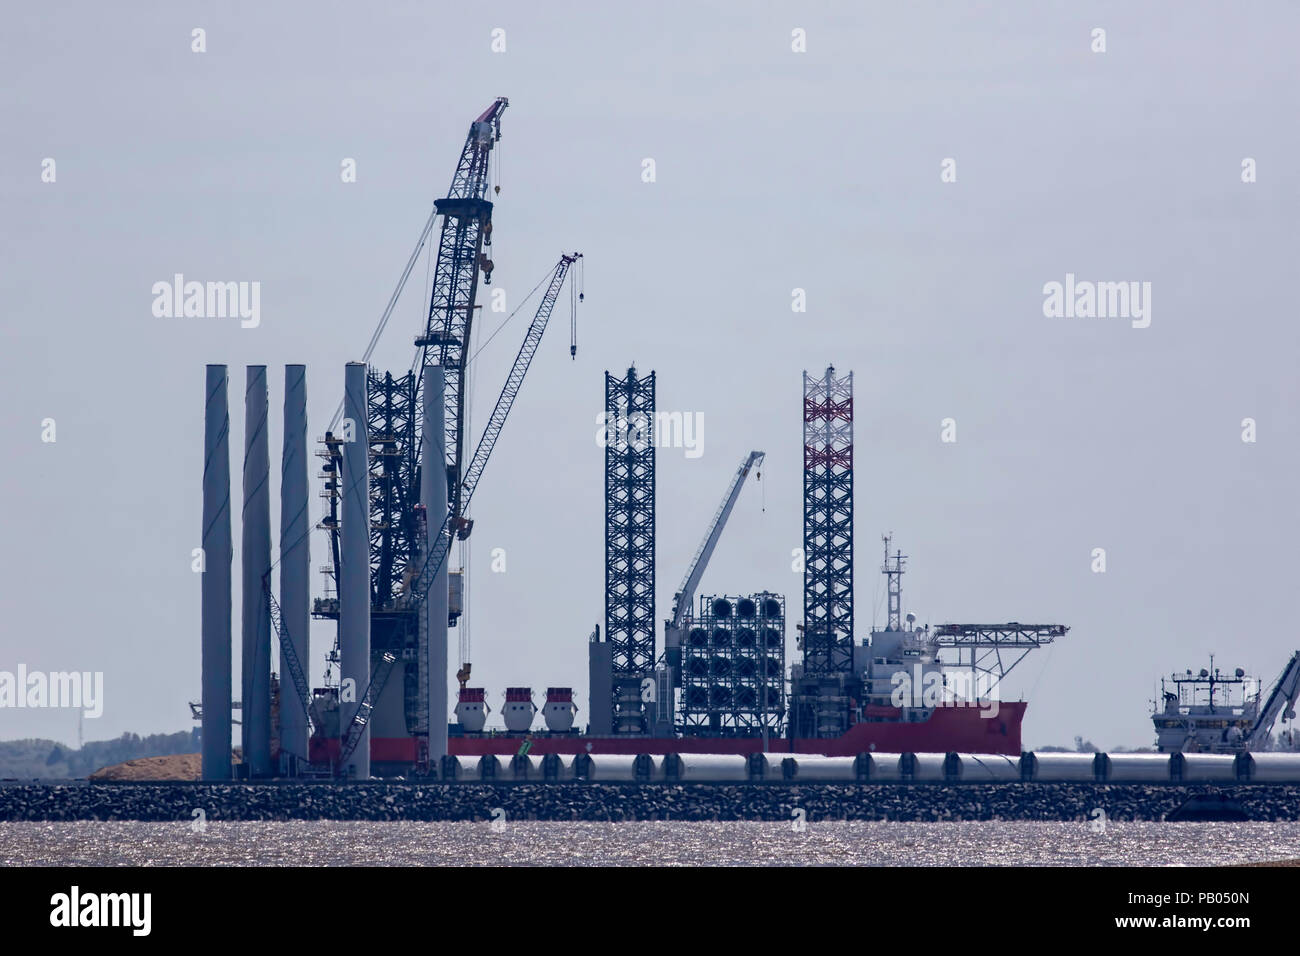 Offshore wind farm construction. Investment in renewable clean energy as a supply vessel ship is docked and ready to receive wind turbine parts. Stock Photo